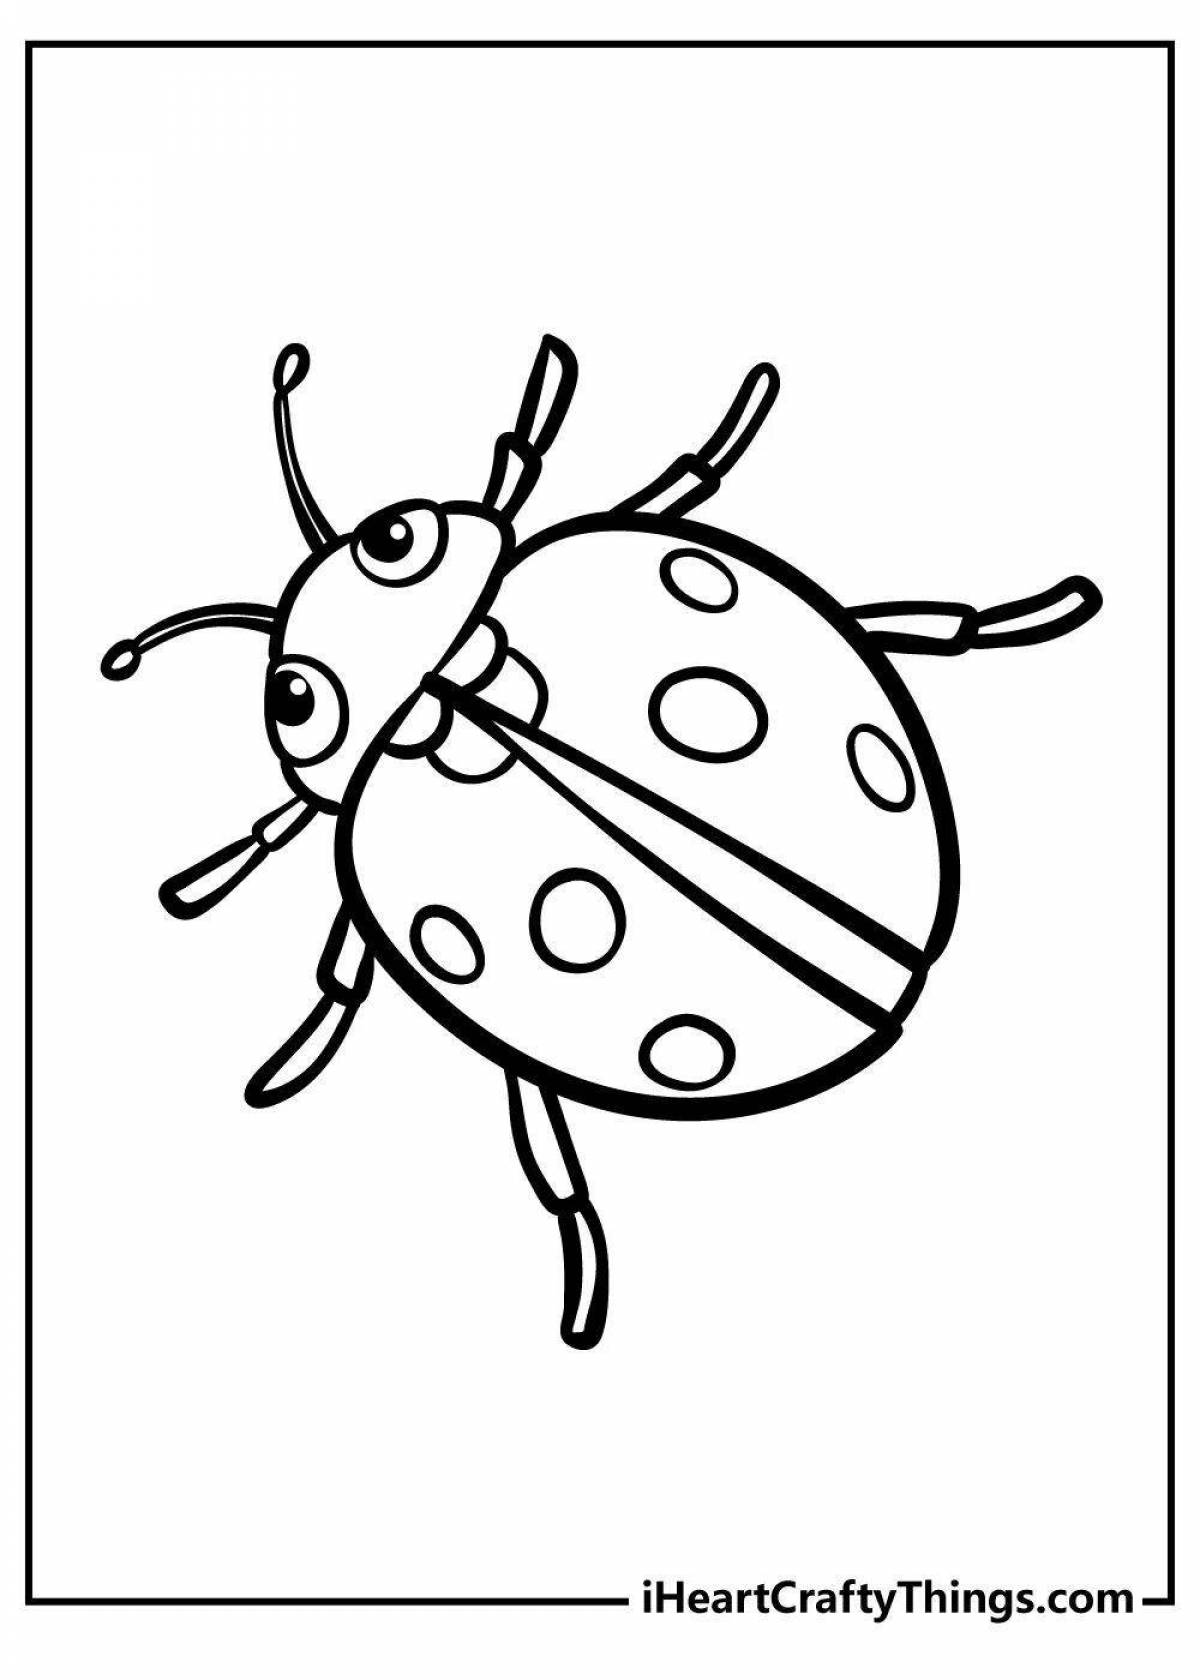 Cute ladybug coloring book for kids